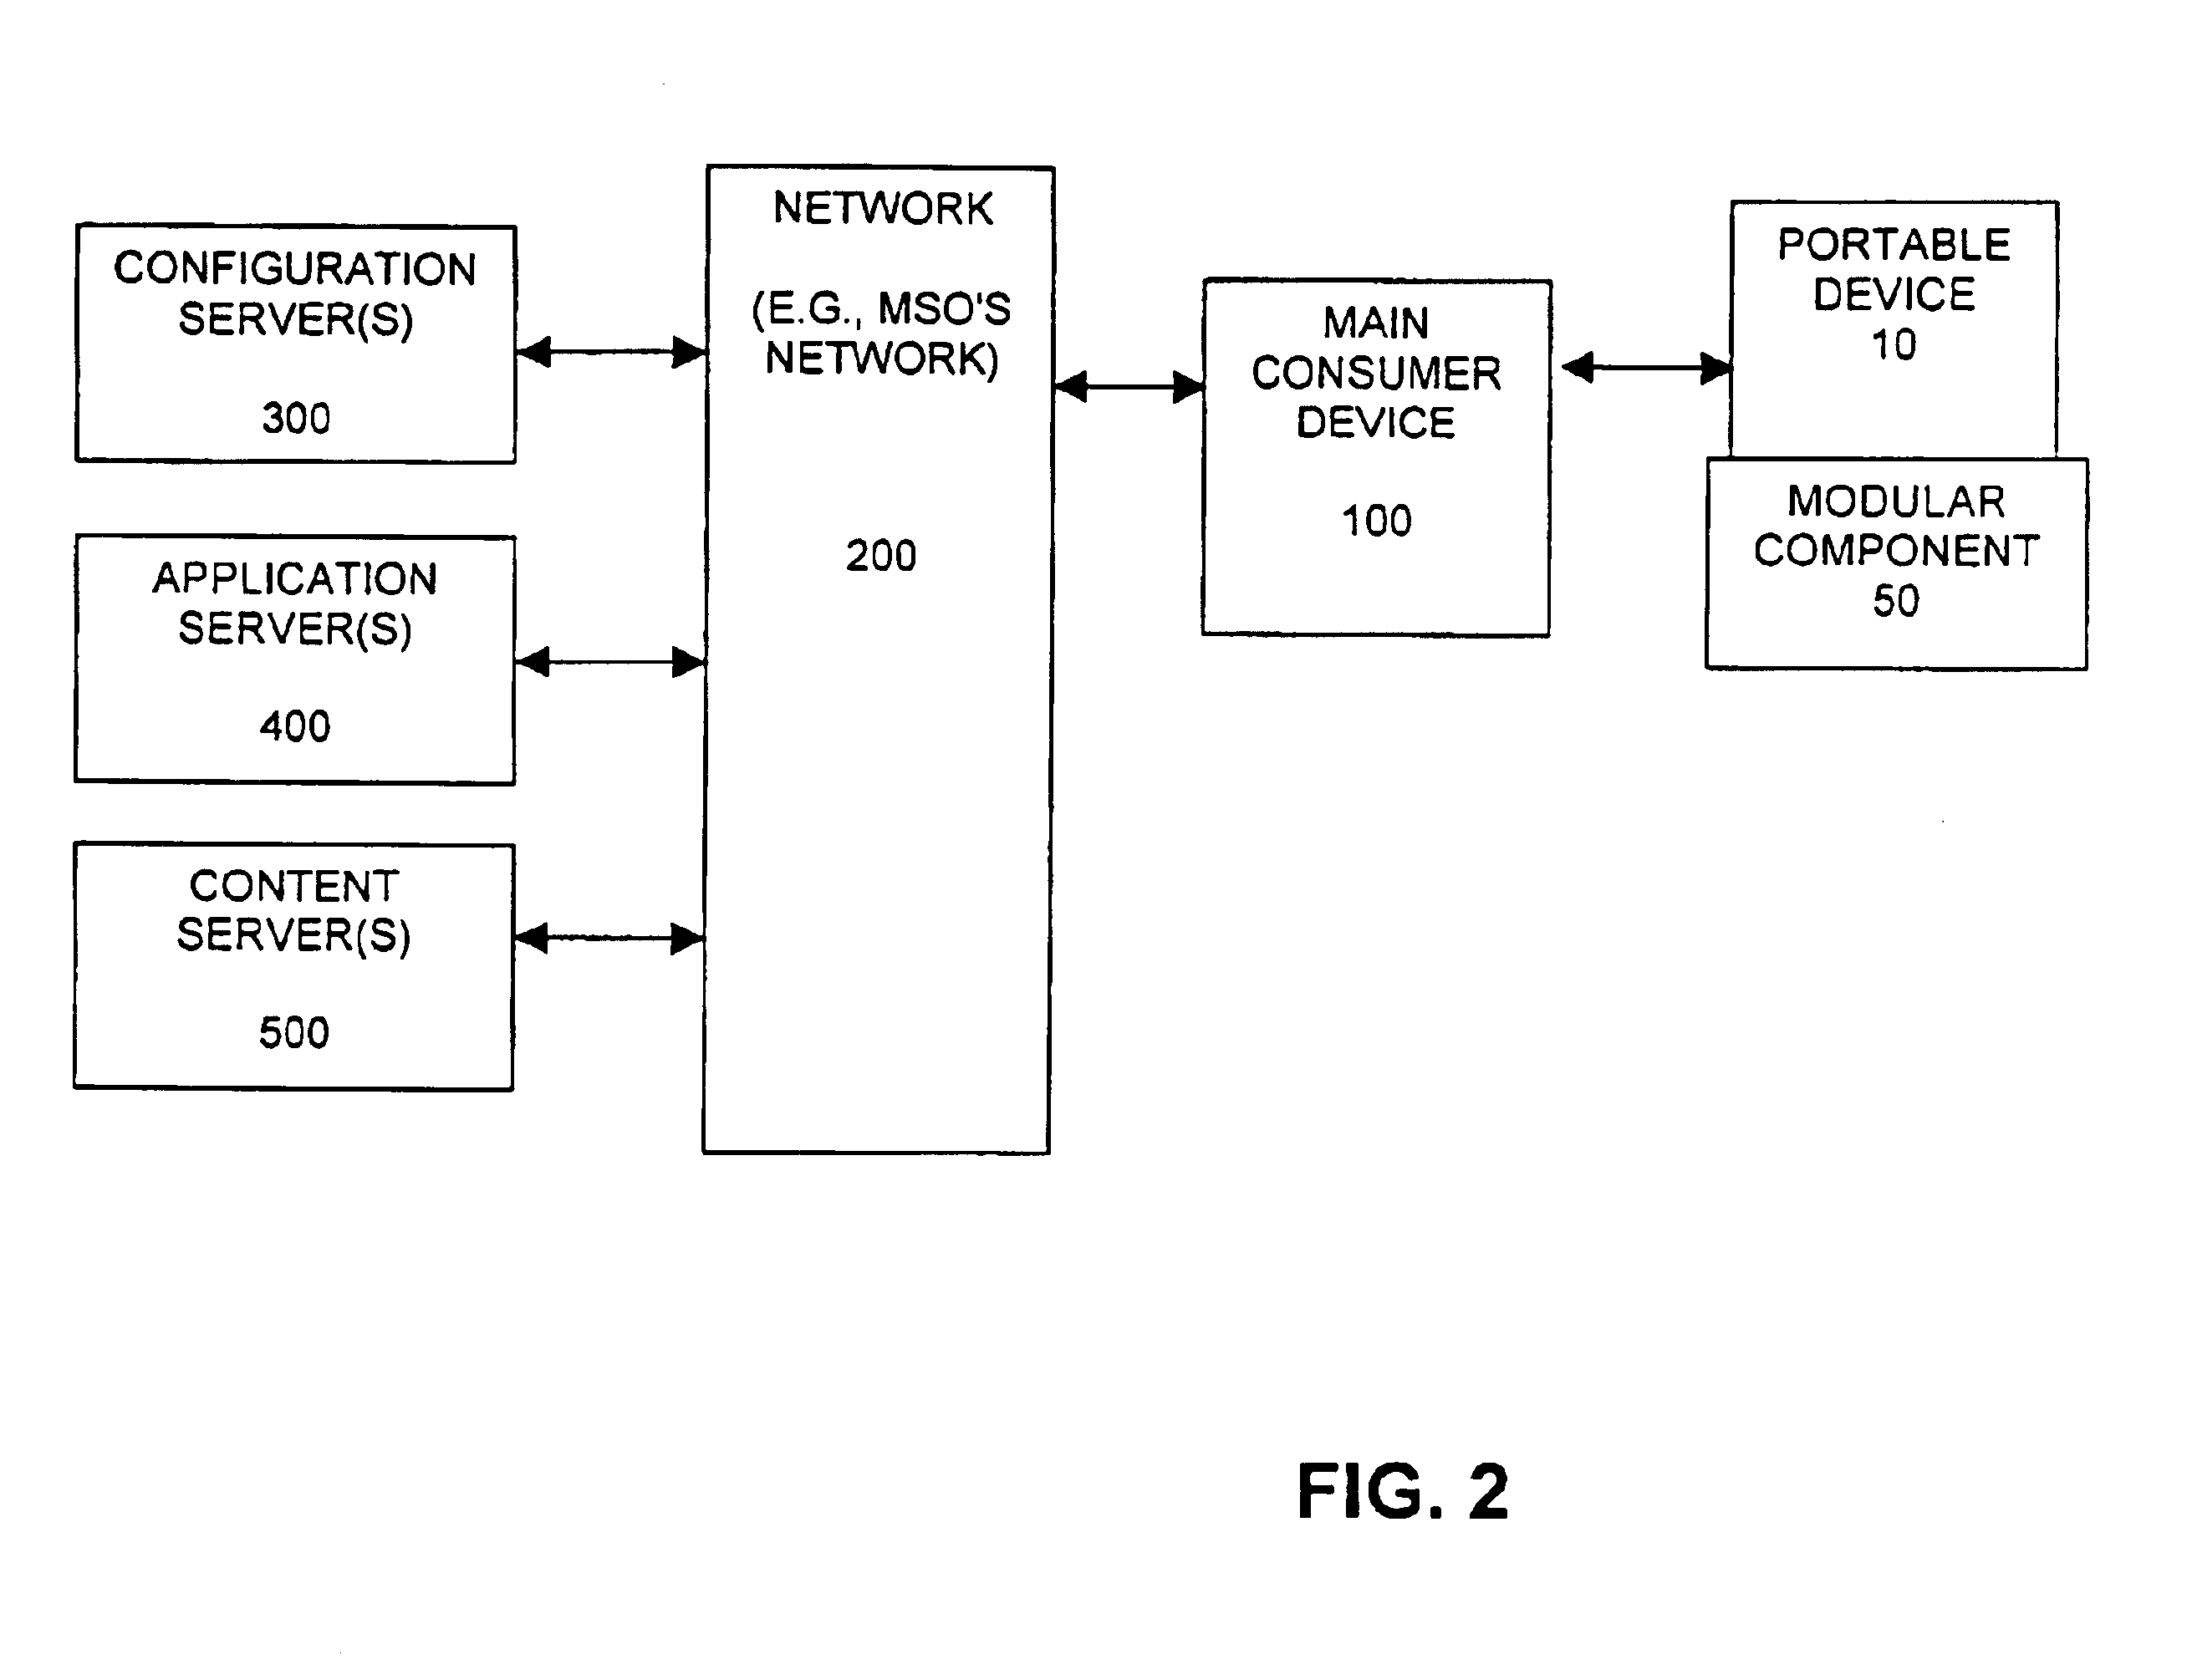 Self-configurable multipurpose modular portable device and methods for configuring same